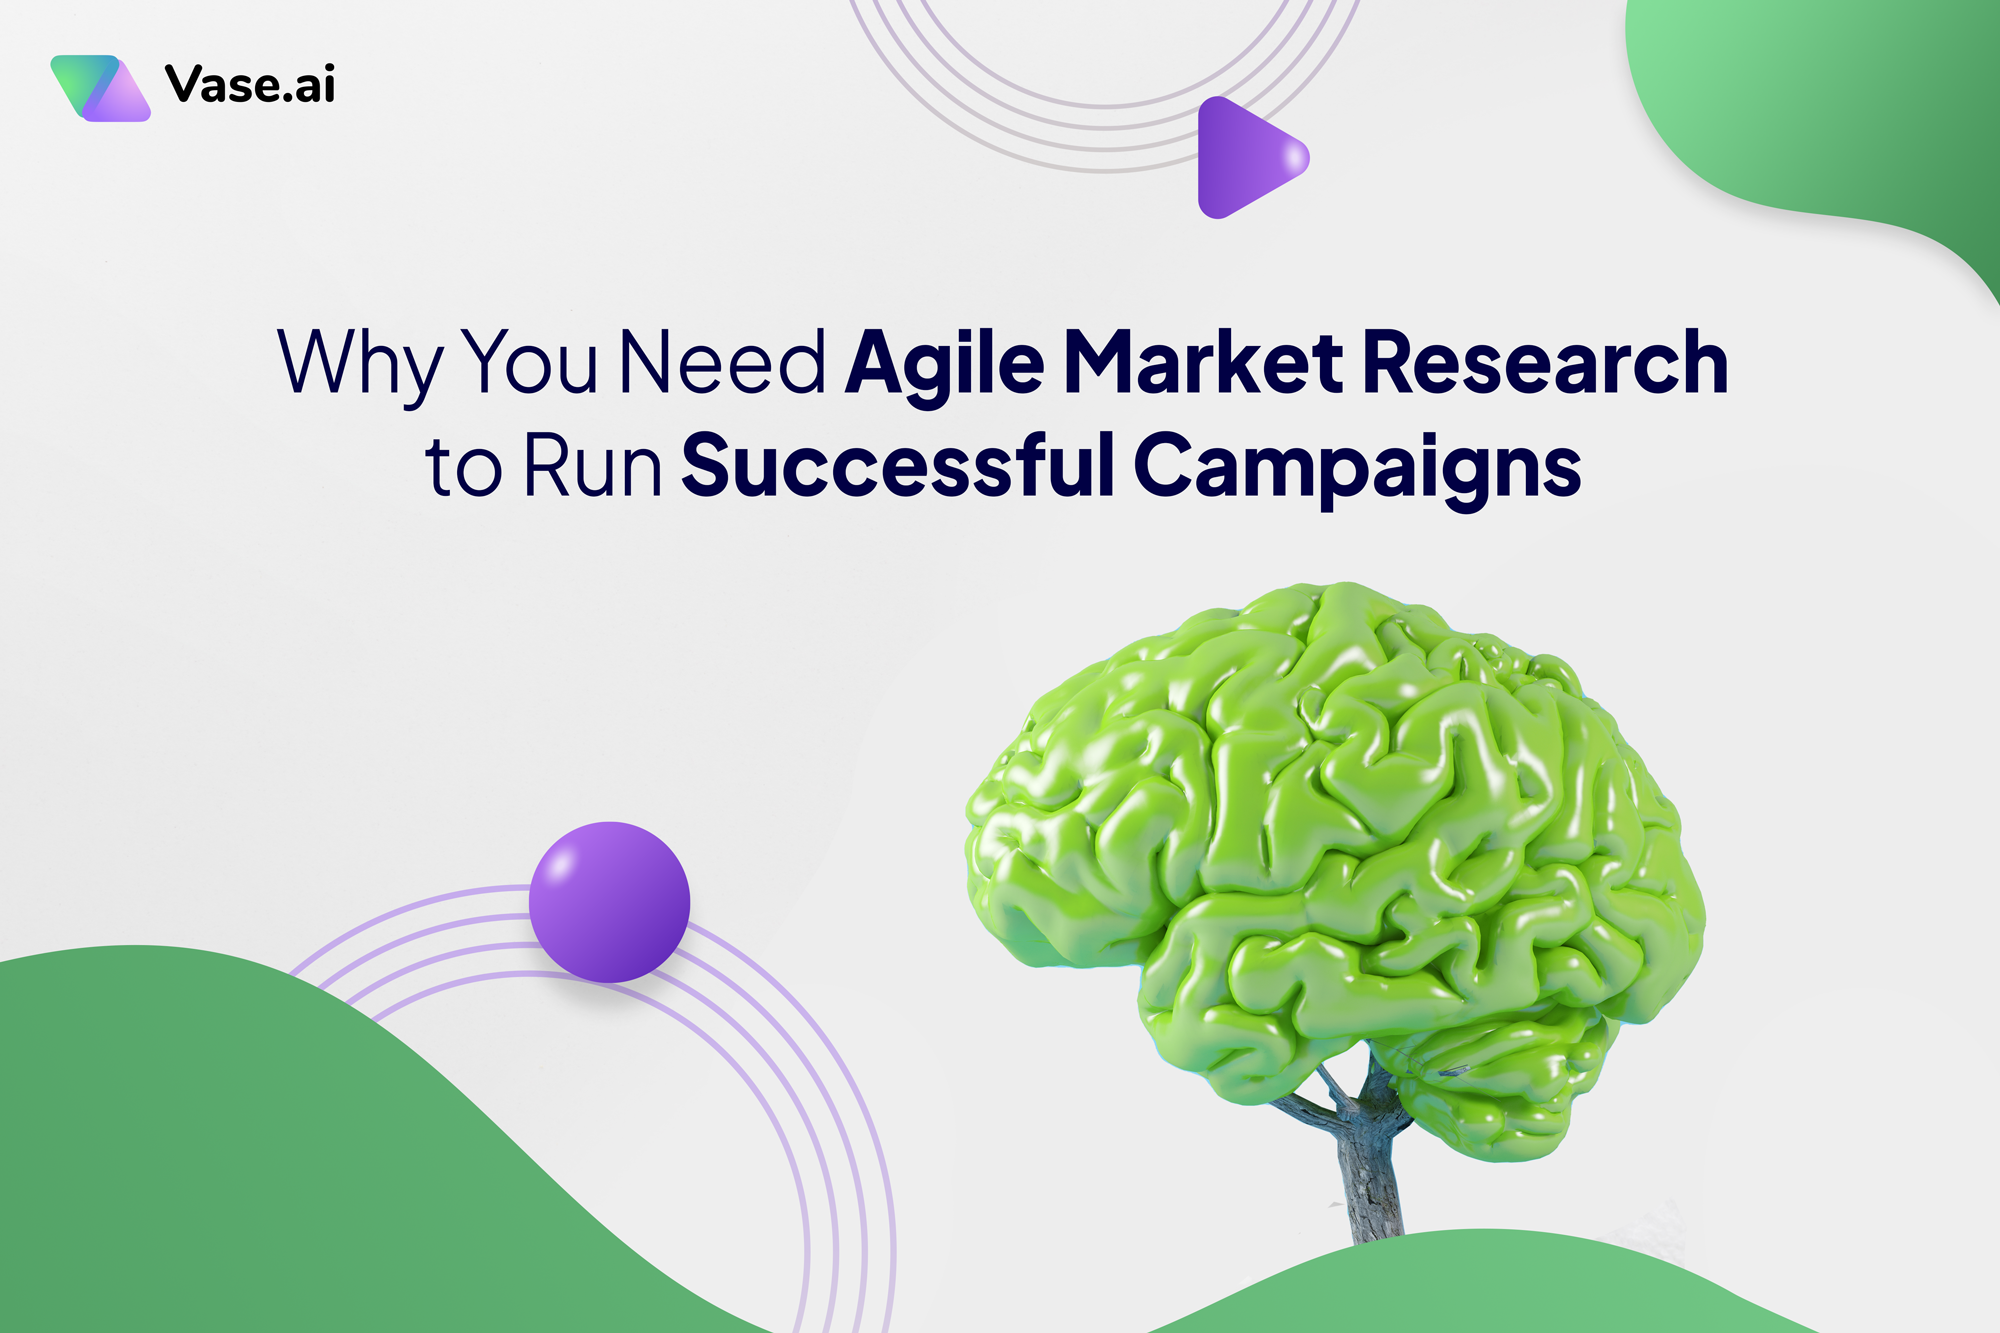 Why You Need Agile Market Research to Run Successful Campaigns